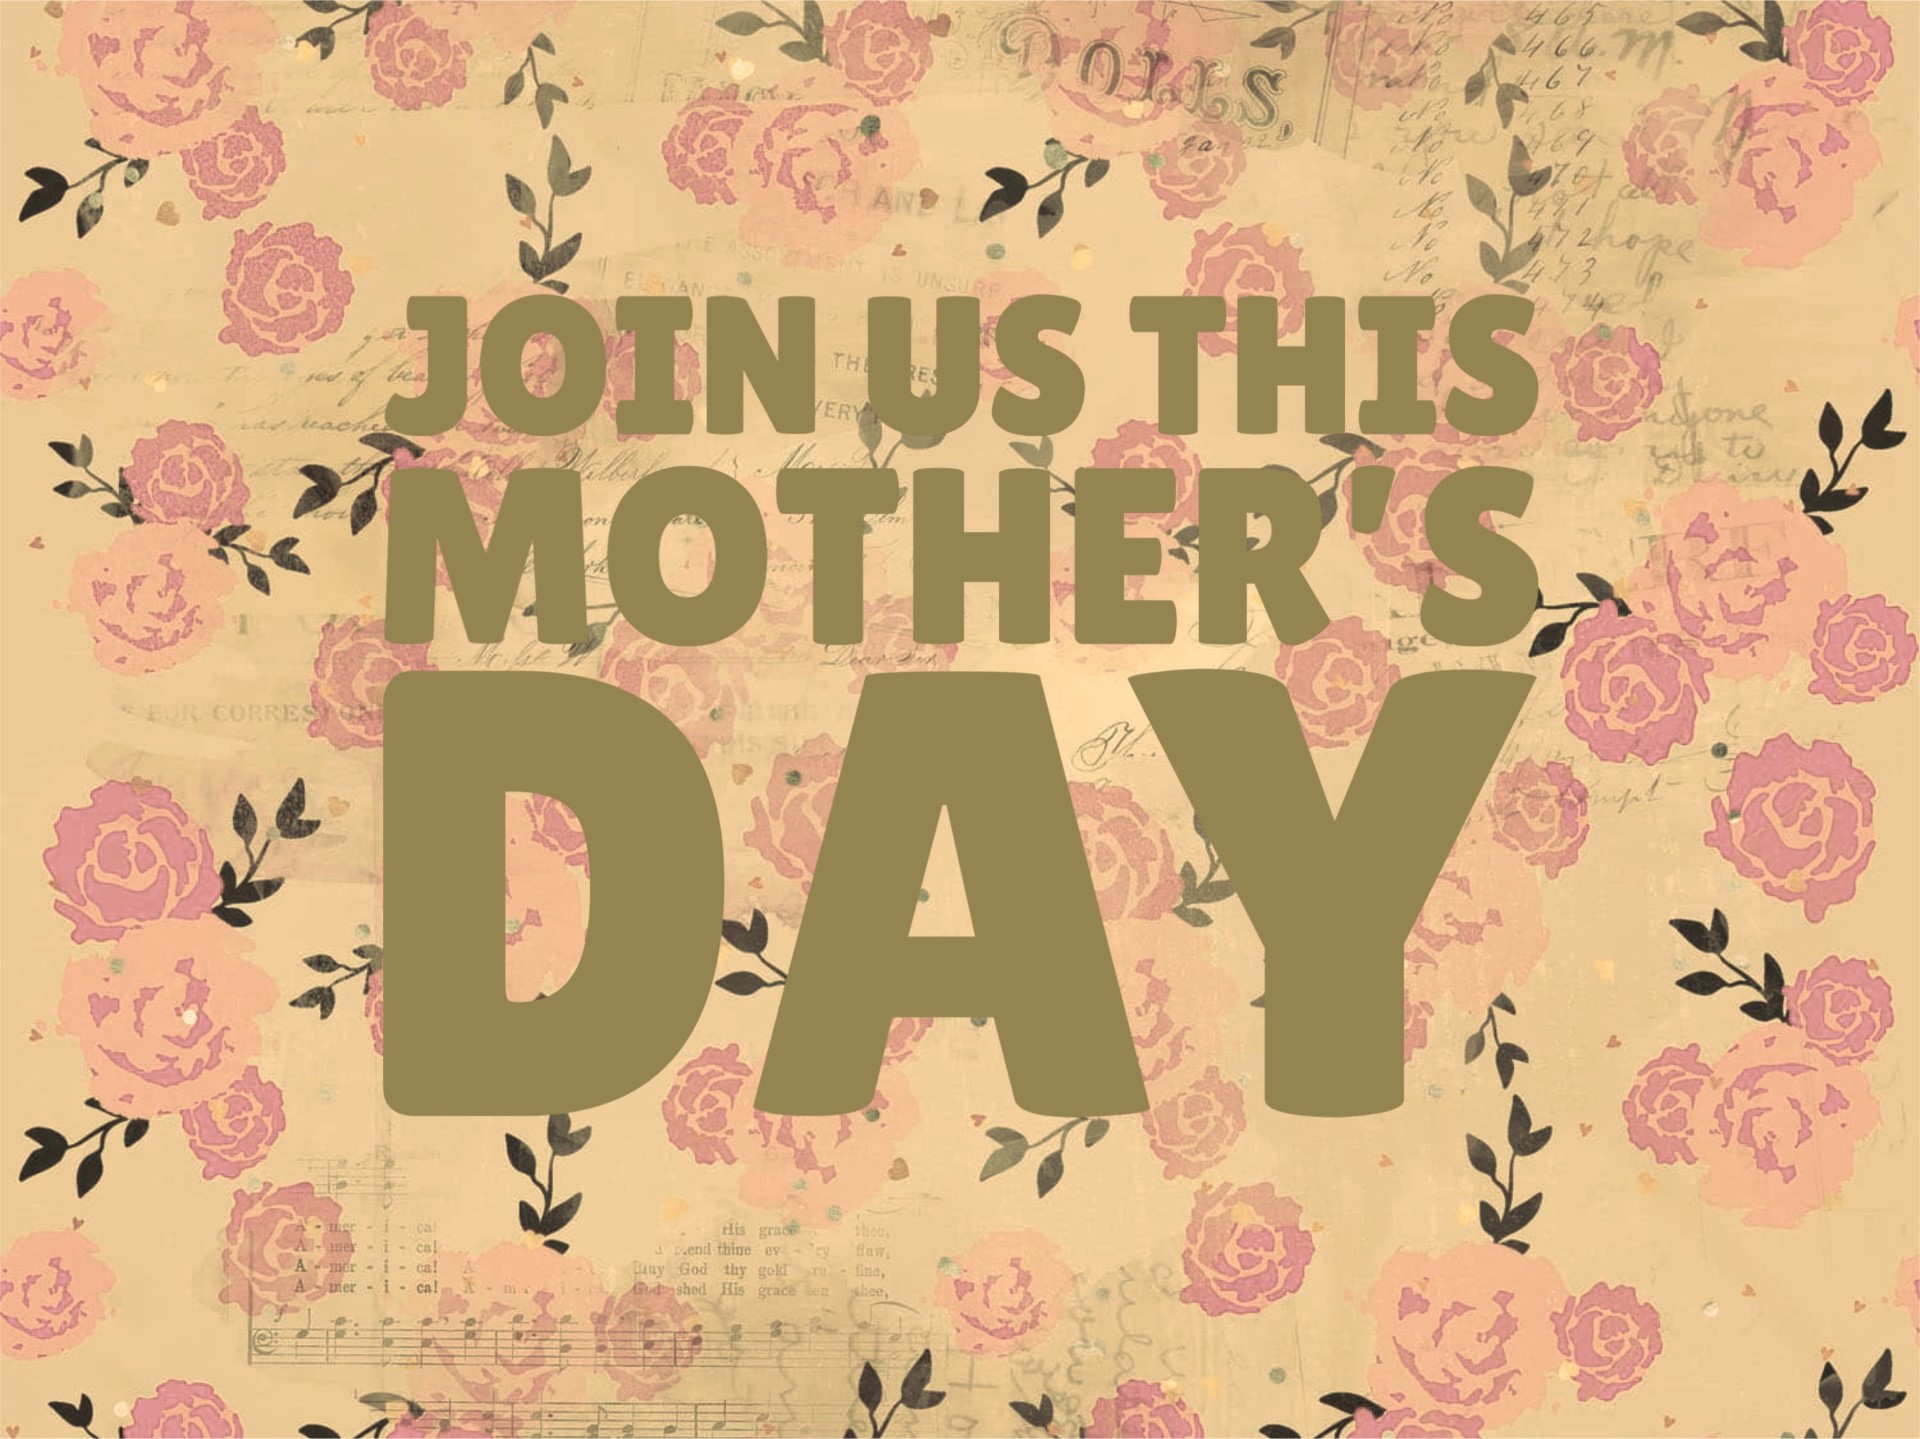 Join us this Sunday at 10am as we celebrate women this Mother's Day.